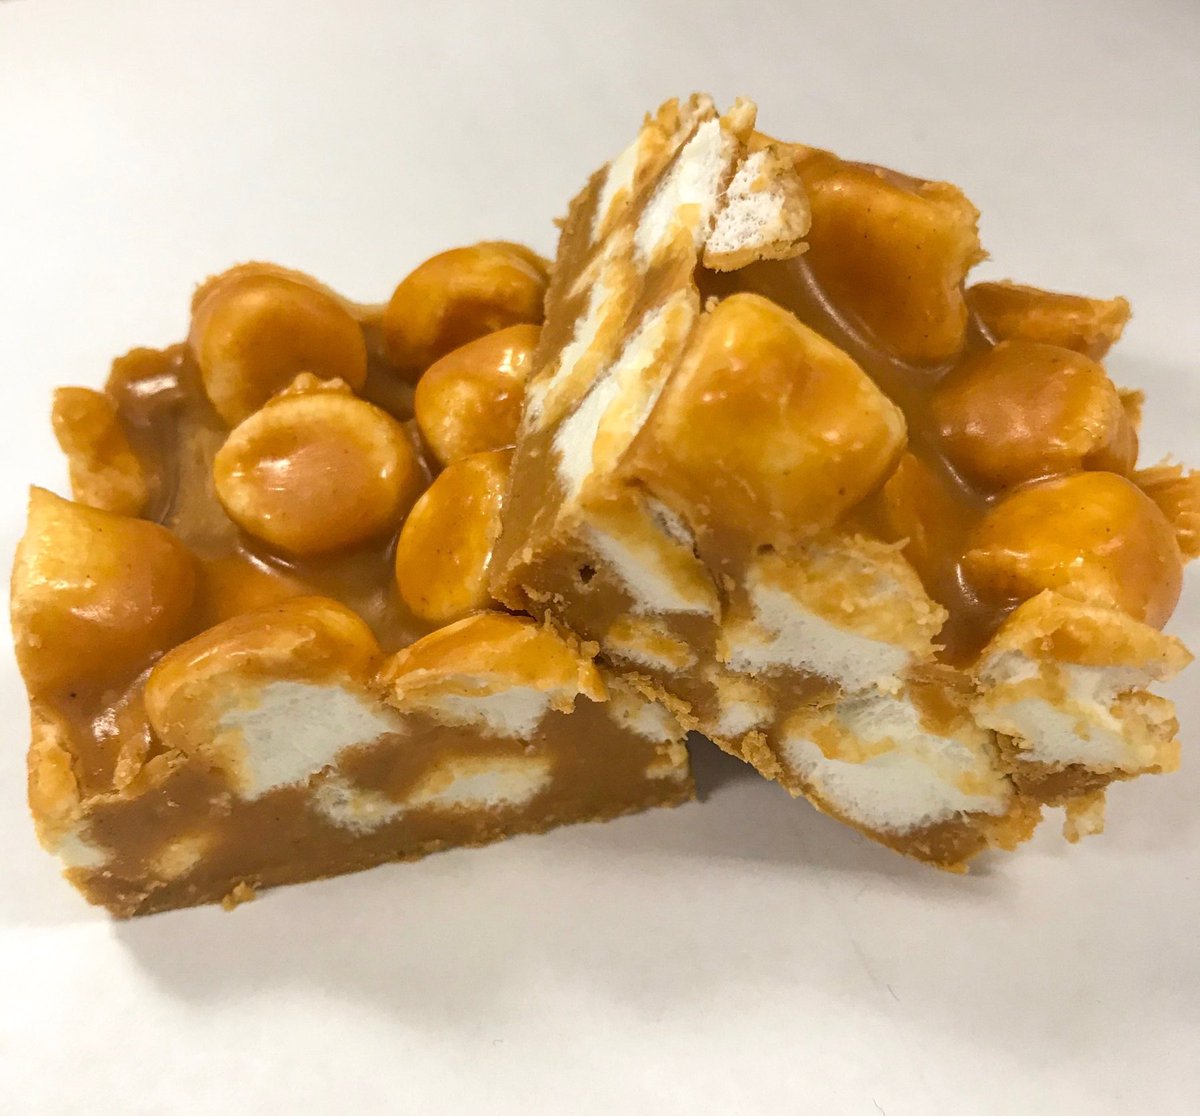 Peanut Butter Butterscotch Squares. The #SuperBowl 🏈 is days away and we may be almost as excited for the #snacks as we are for the game. Only 4 ingredients and #nobake, this is a great dessert option for your #SuperBowlParty 🎉 simplydellicious.com/recipes/peanut…